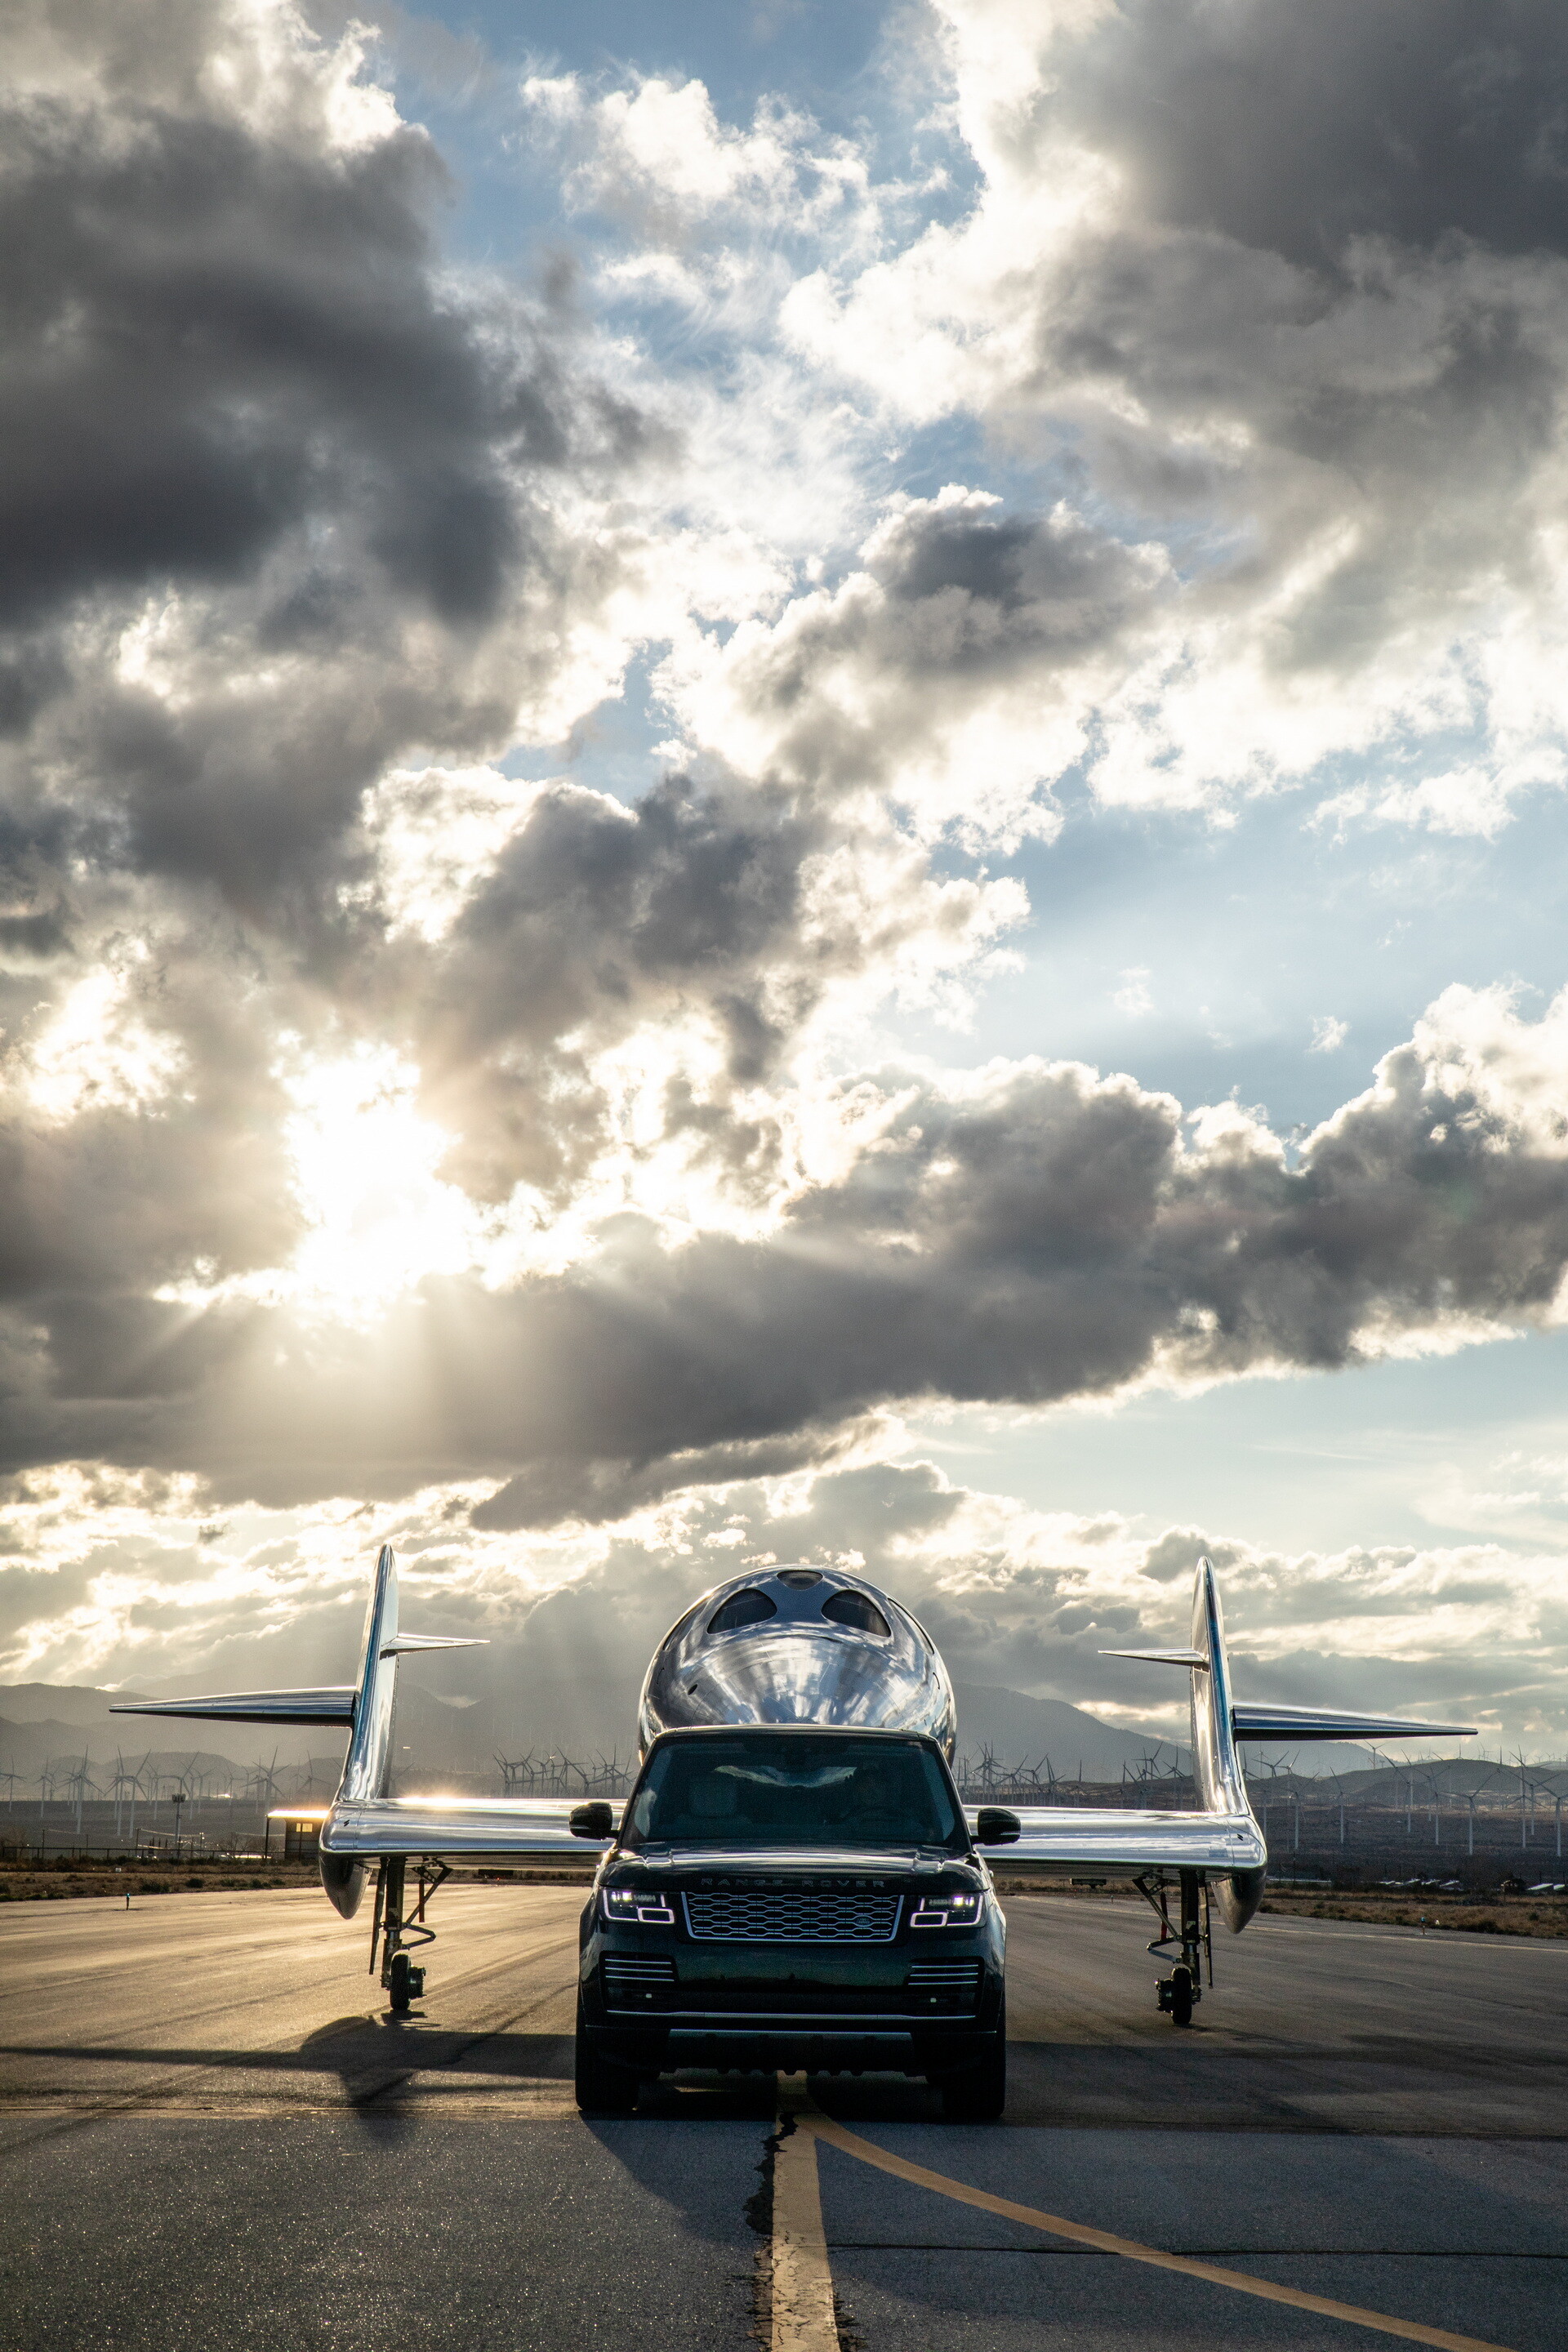 Virgin Galactic: Spaceflight company founded by Richard Branson, Aerospace manufacturer. 1920x2880 HD Wallpaper.